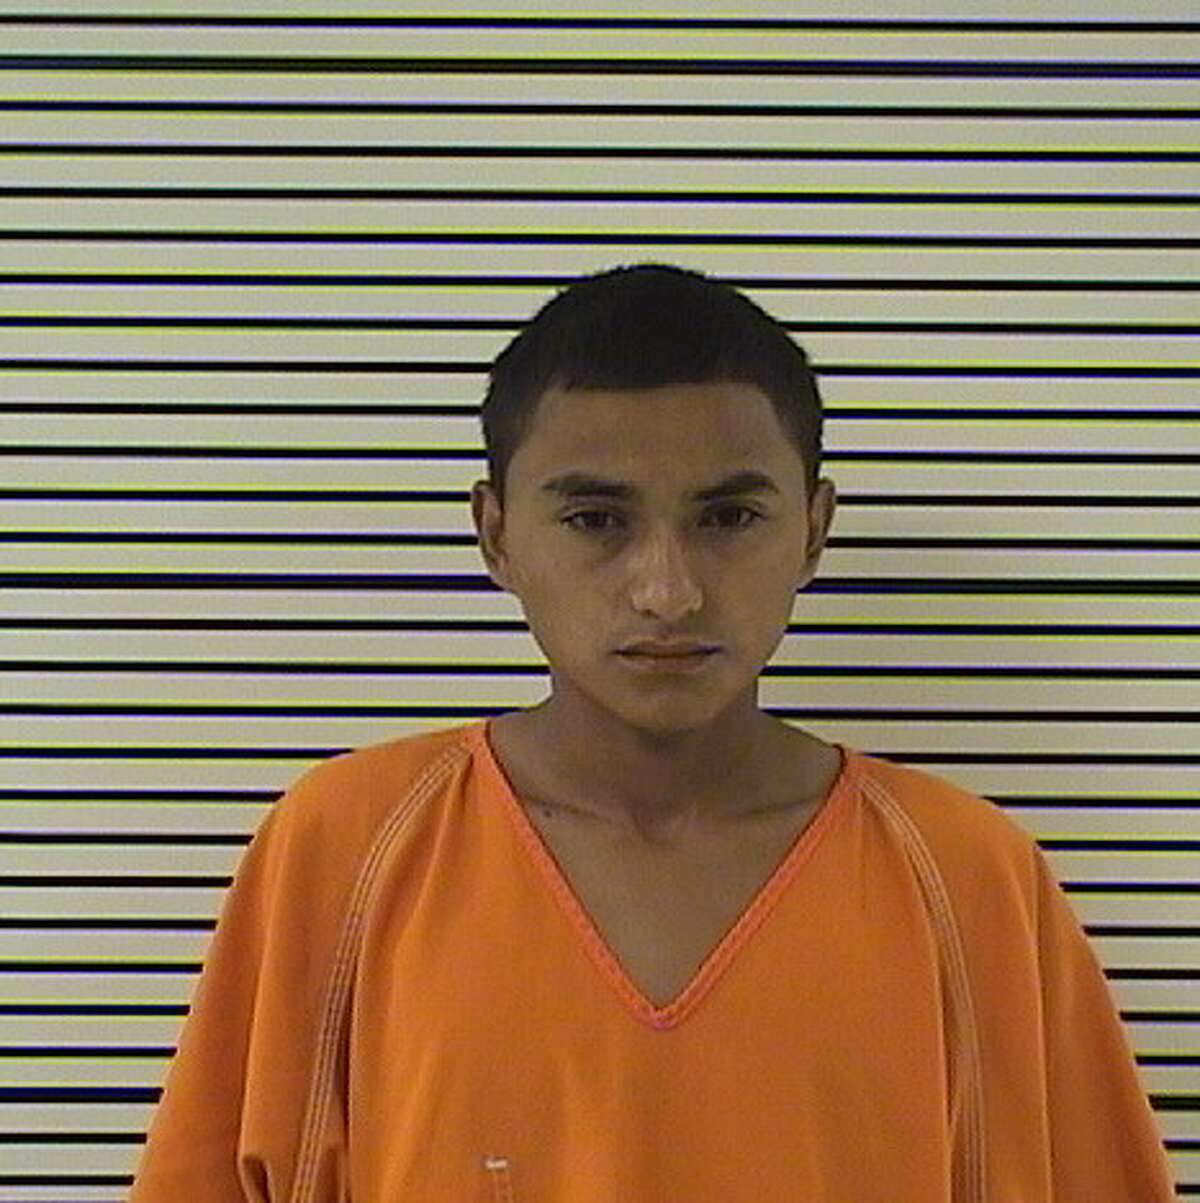 Abner Portillo One of the six suspects charged with the murder of a teen from Spring, according to the Huntsville Police Department.